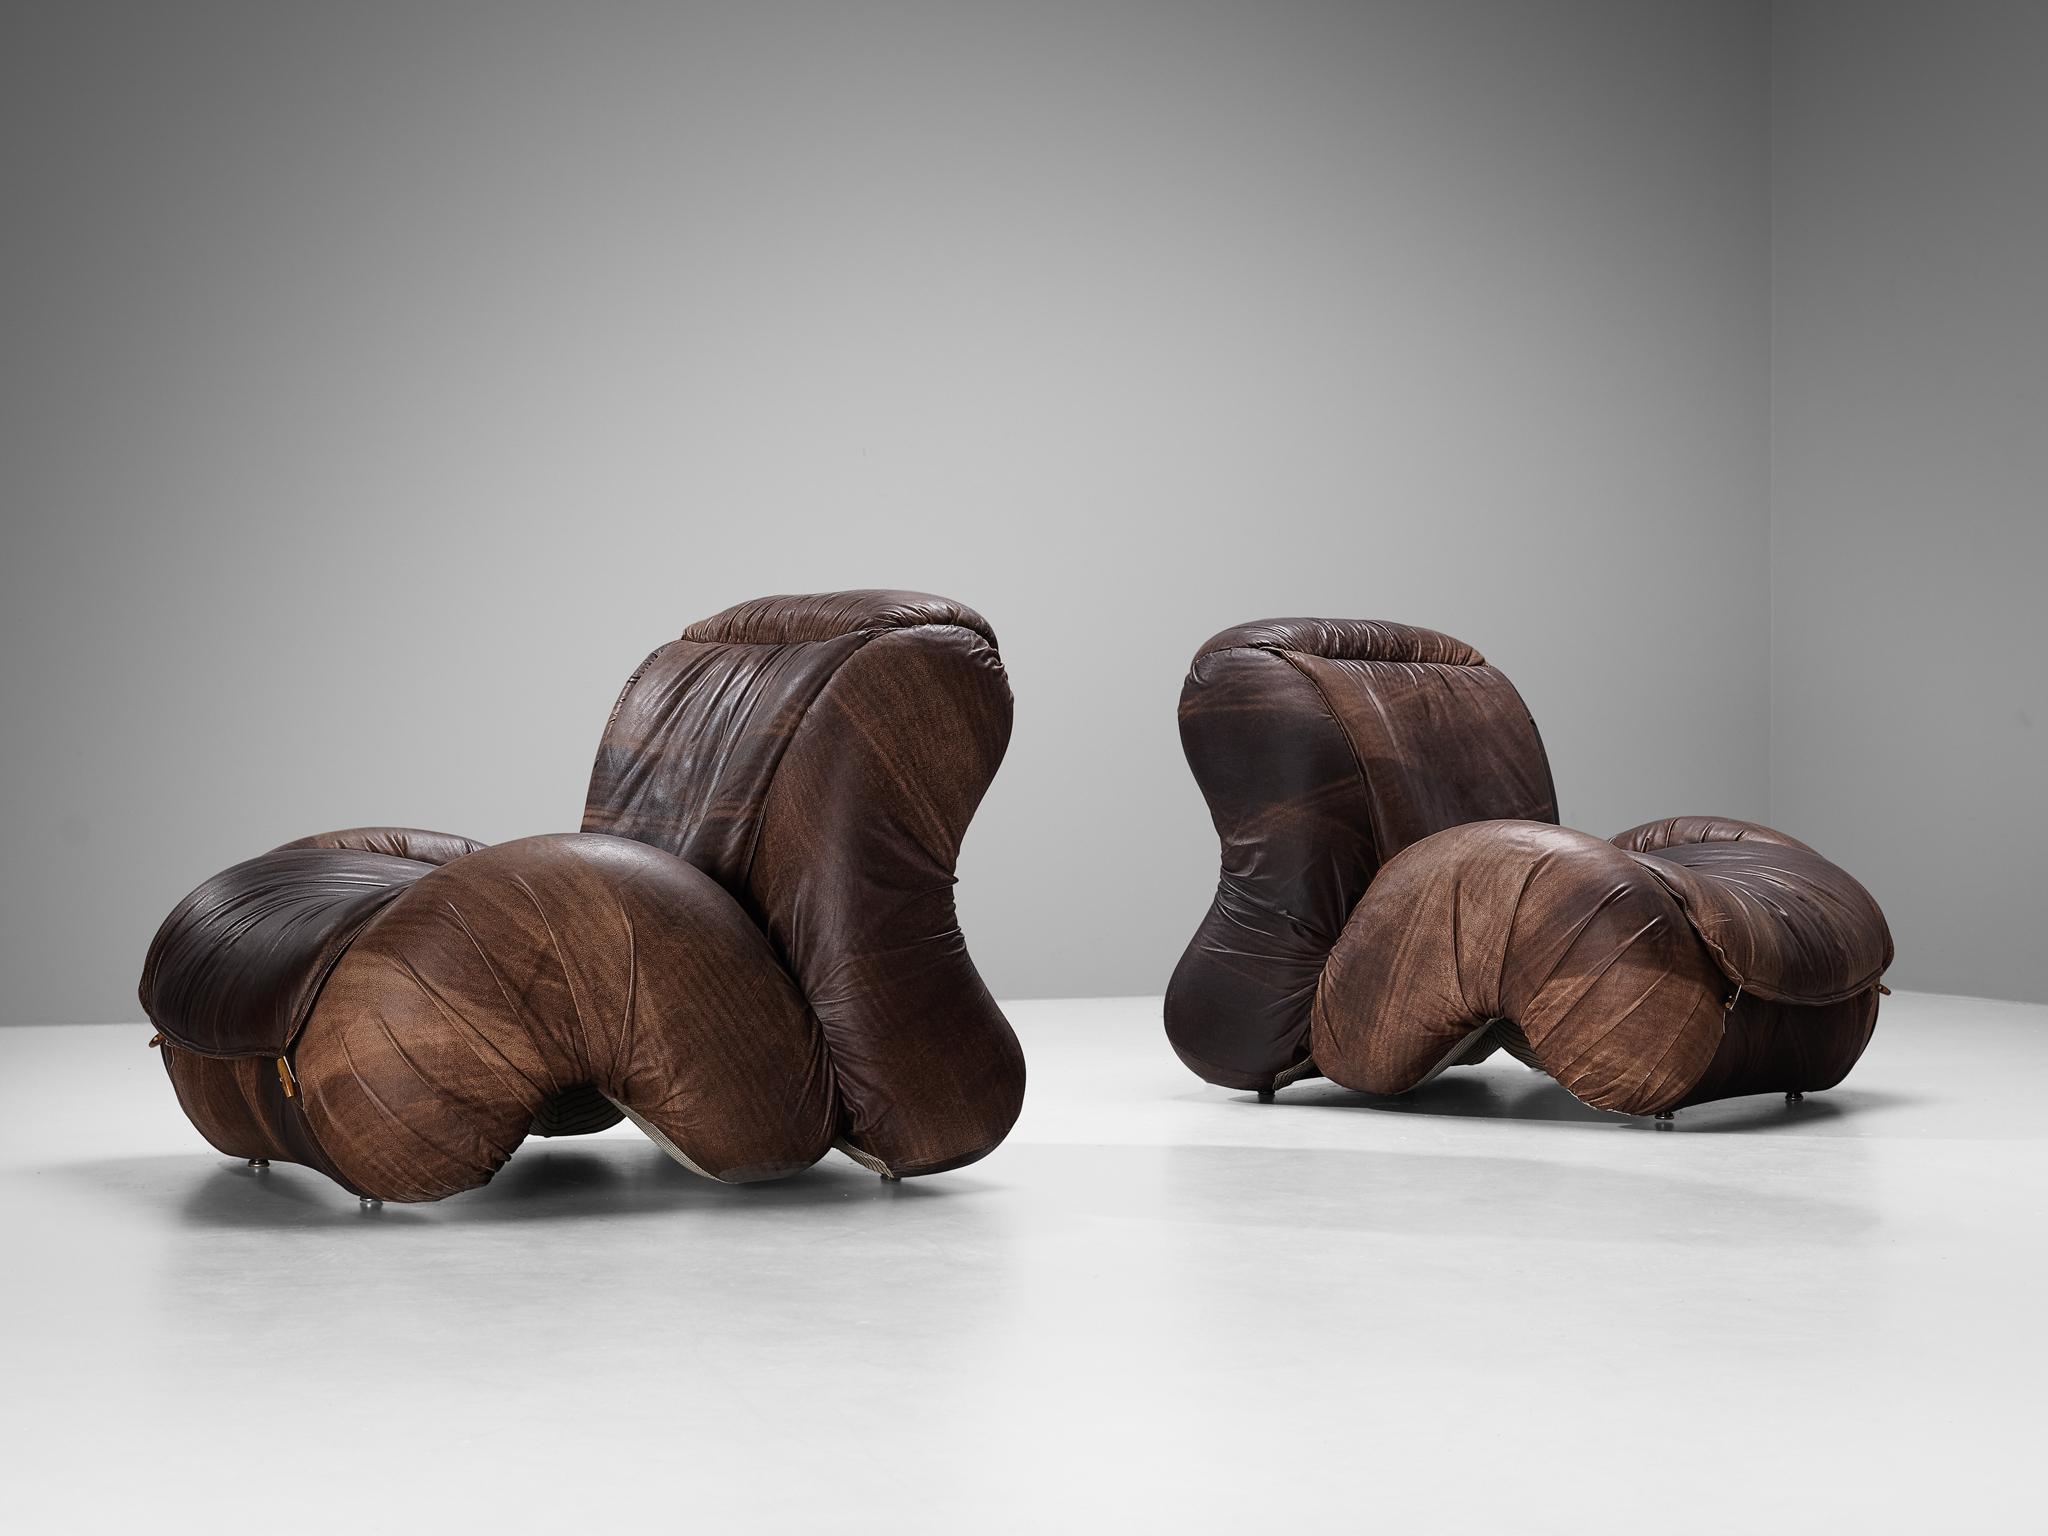 Pair of lounge chairs, leather, beech, Italy, 1970s 

These postmodern Italian lounge chairs will surely grab the viewer's attention. The construction is based on enlarged biomorphic shapes with curvaceous lines and bold shapes dominating the